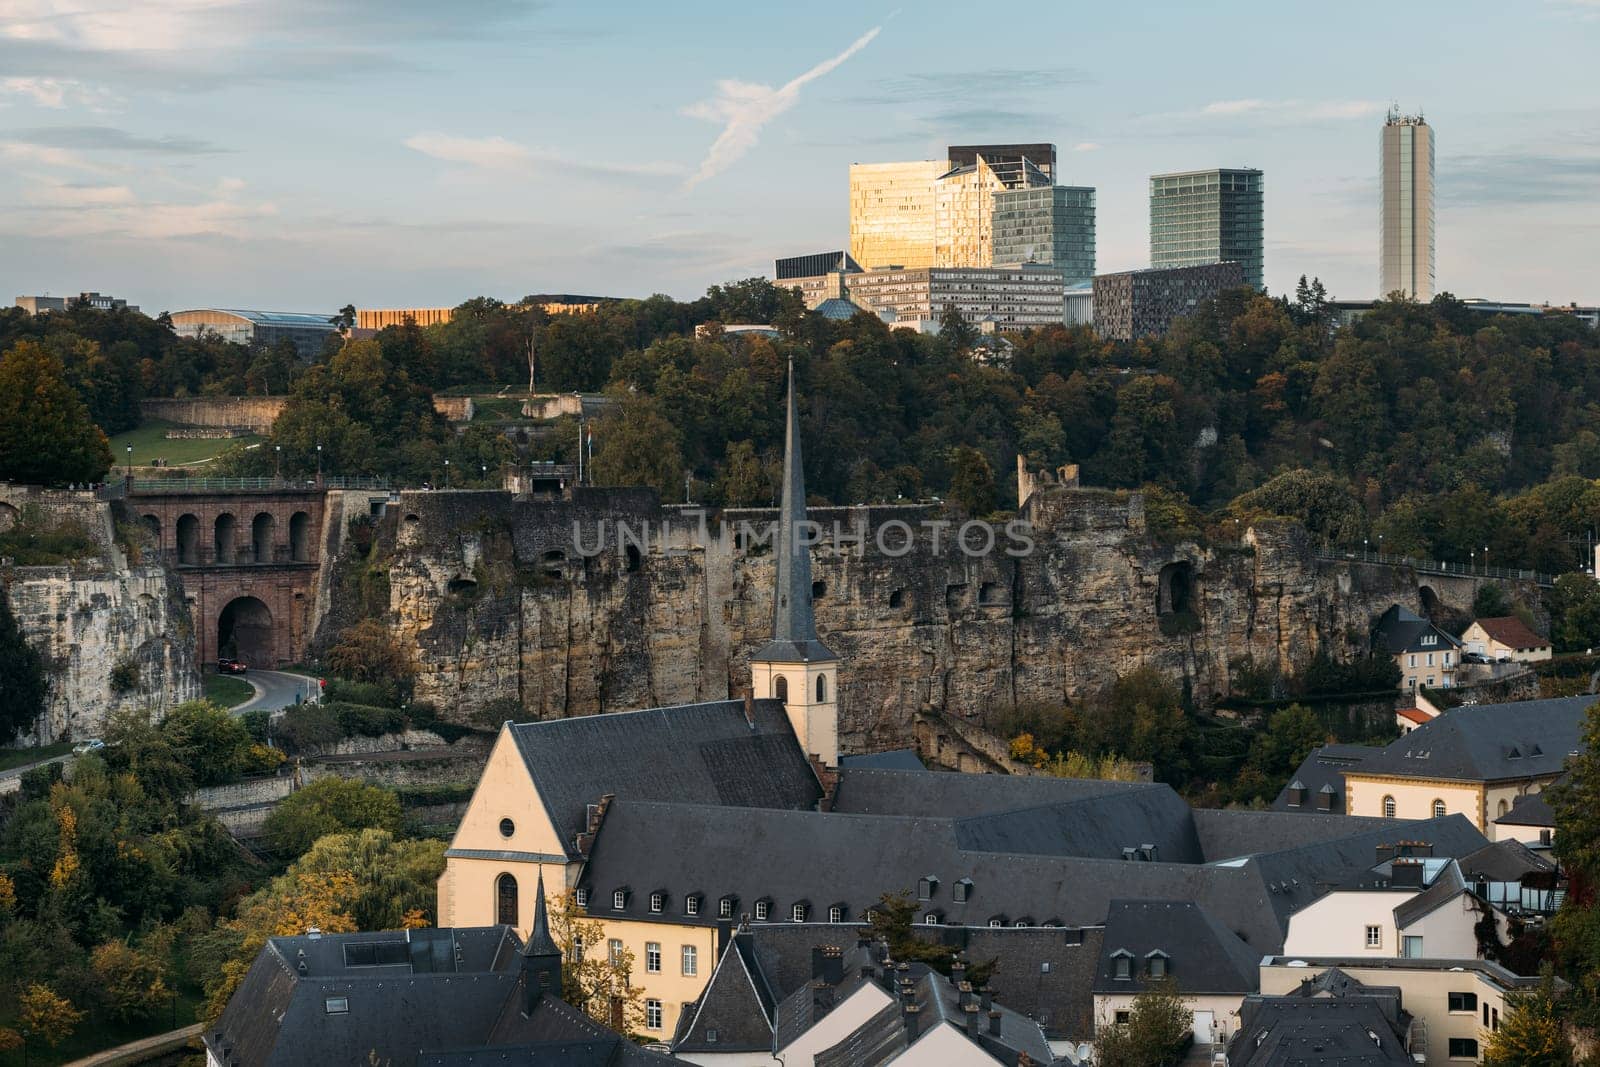 Panorama of constructions from three different periods in Luxemburg by apavlin